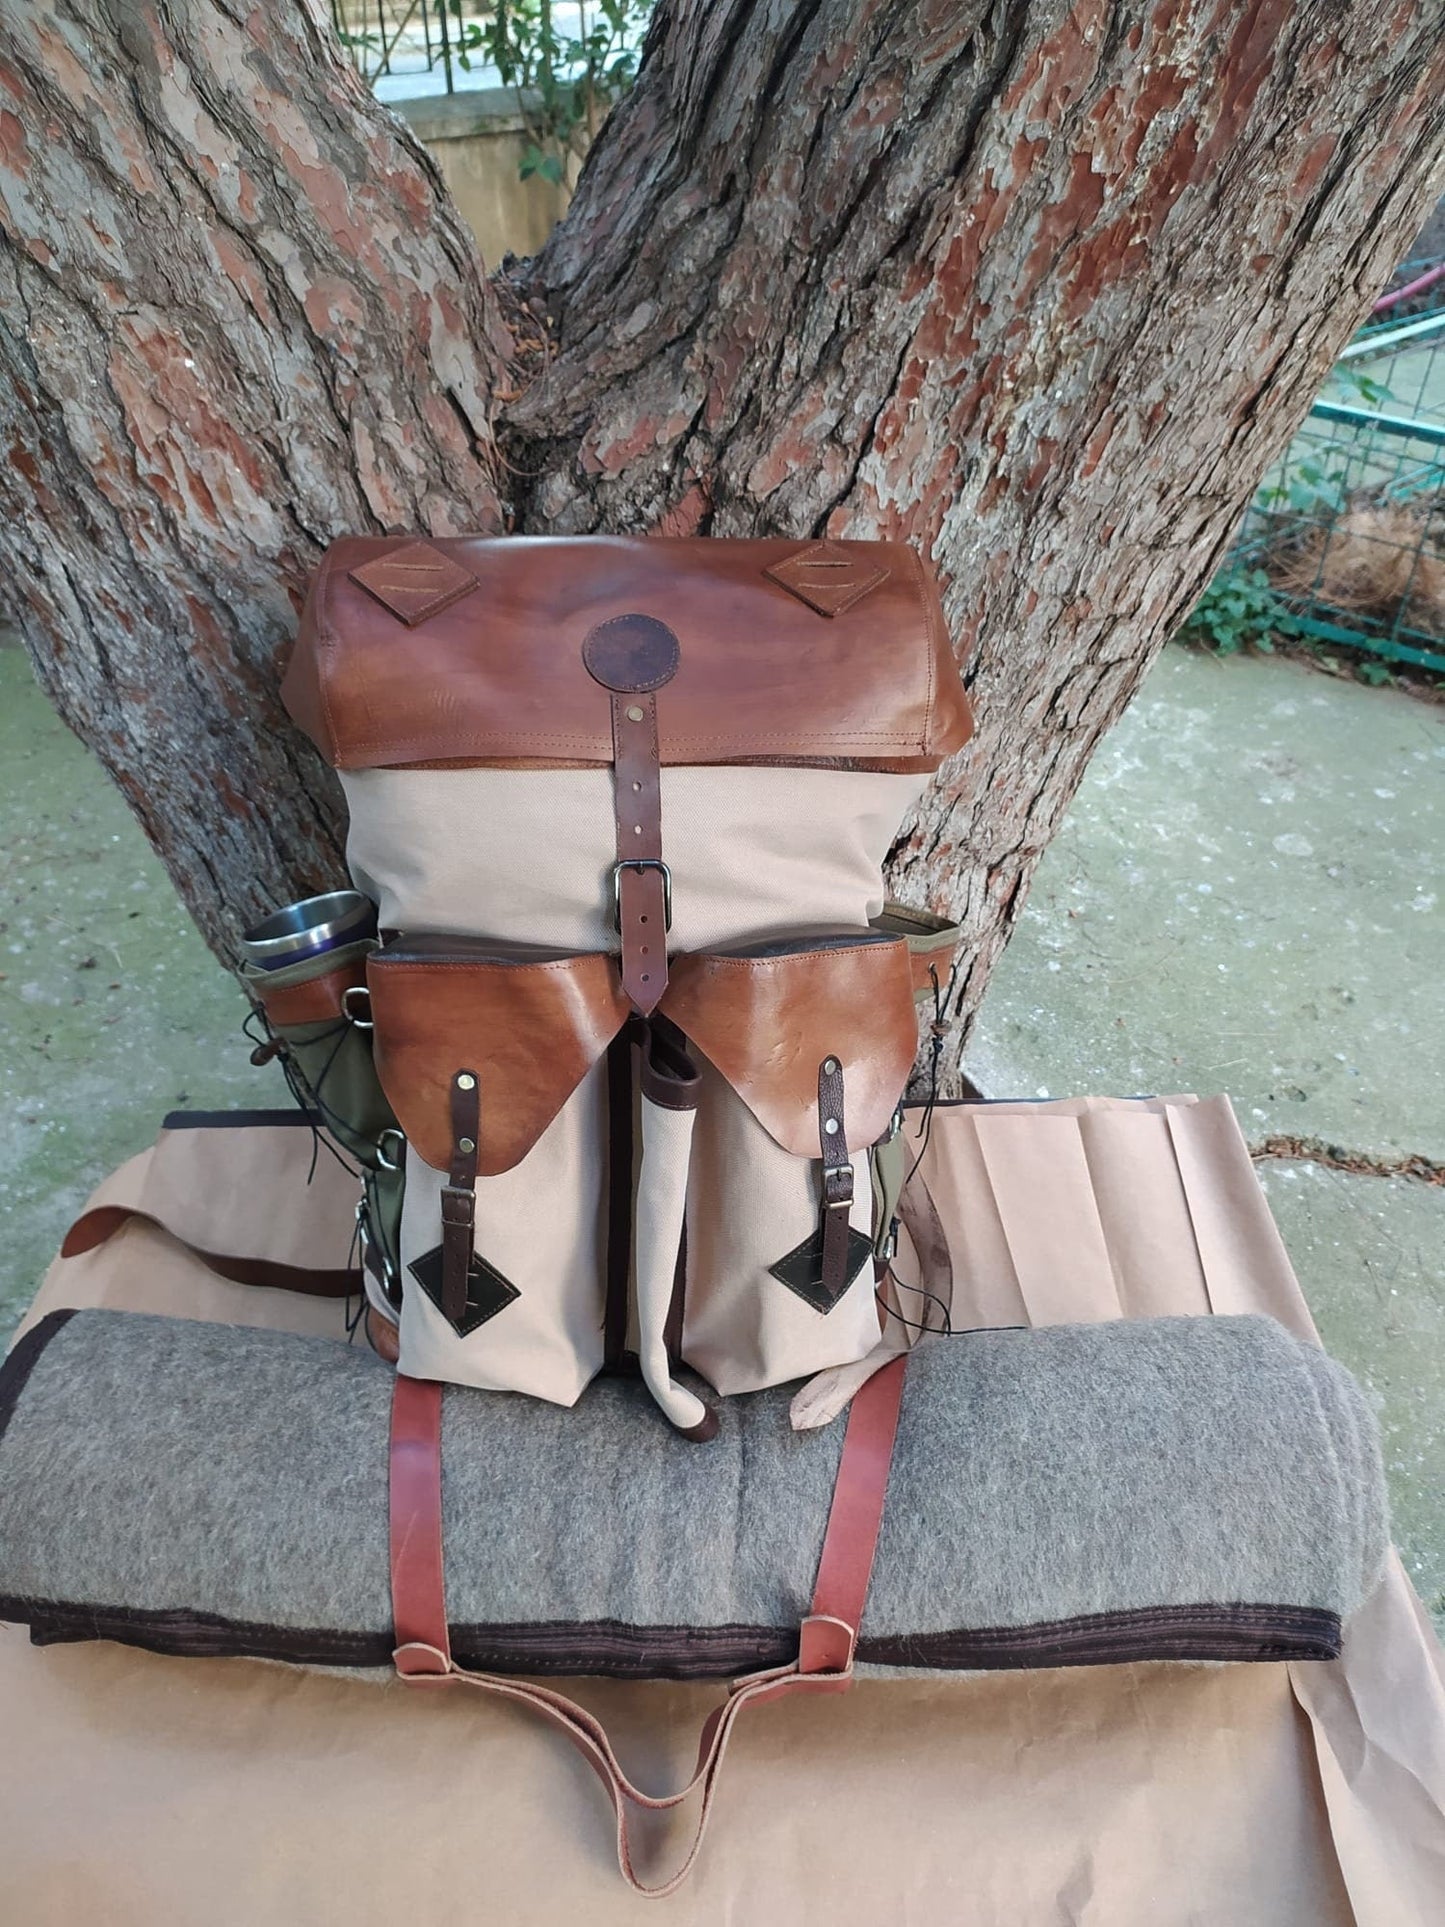 200 USD Discount | Bushcraft Design Awards | Handmade Leather and Waxed Backpack for Travel, Camping, Hunting | 45 Liter | Personalization bushcraft - camping - hiking backpack 99percenthandmade   